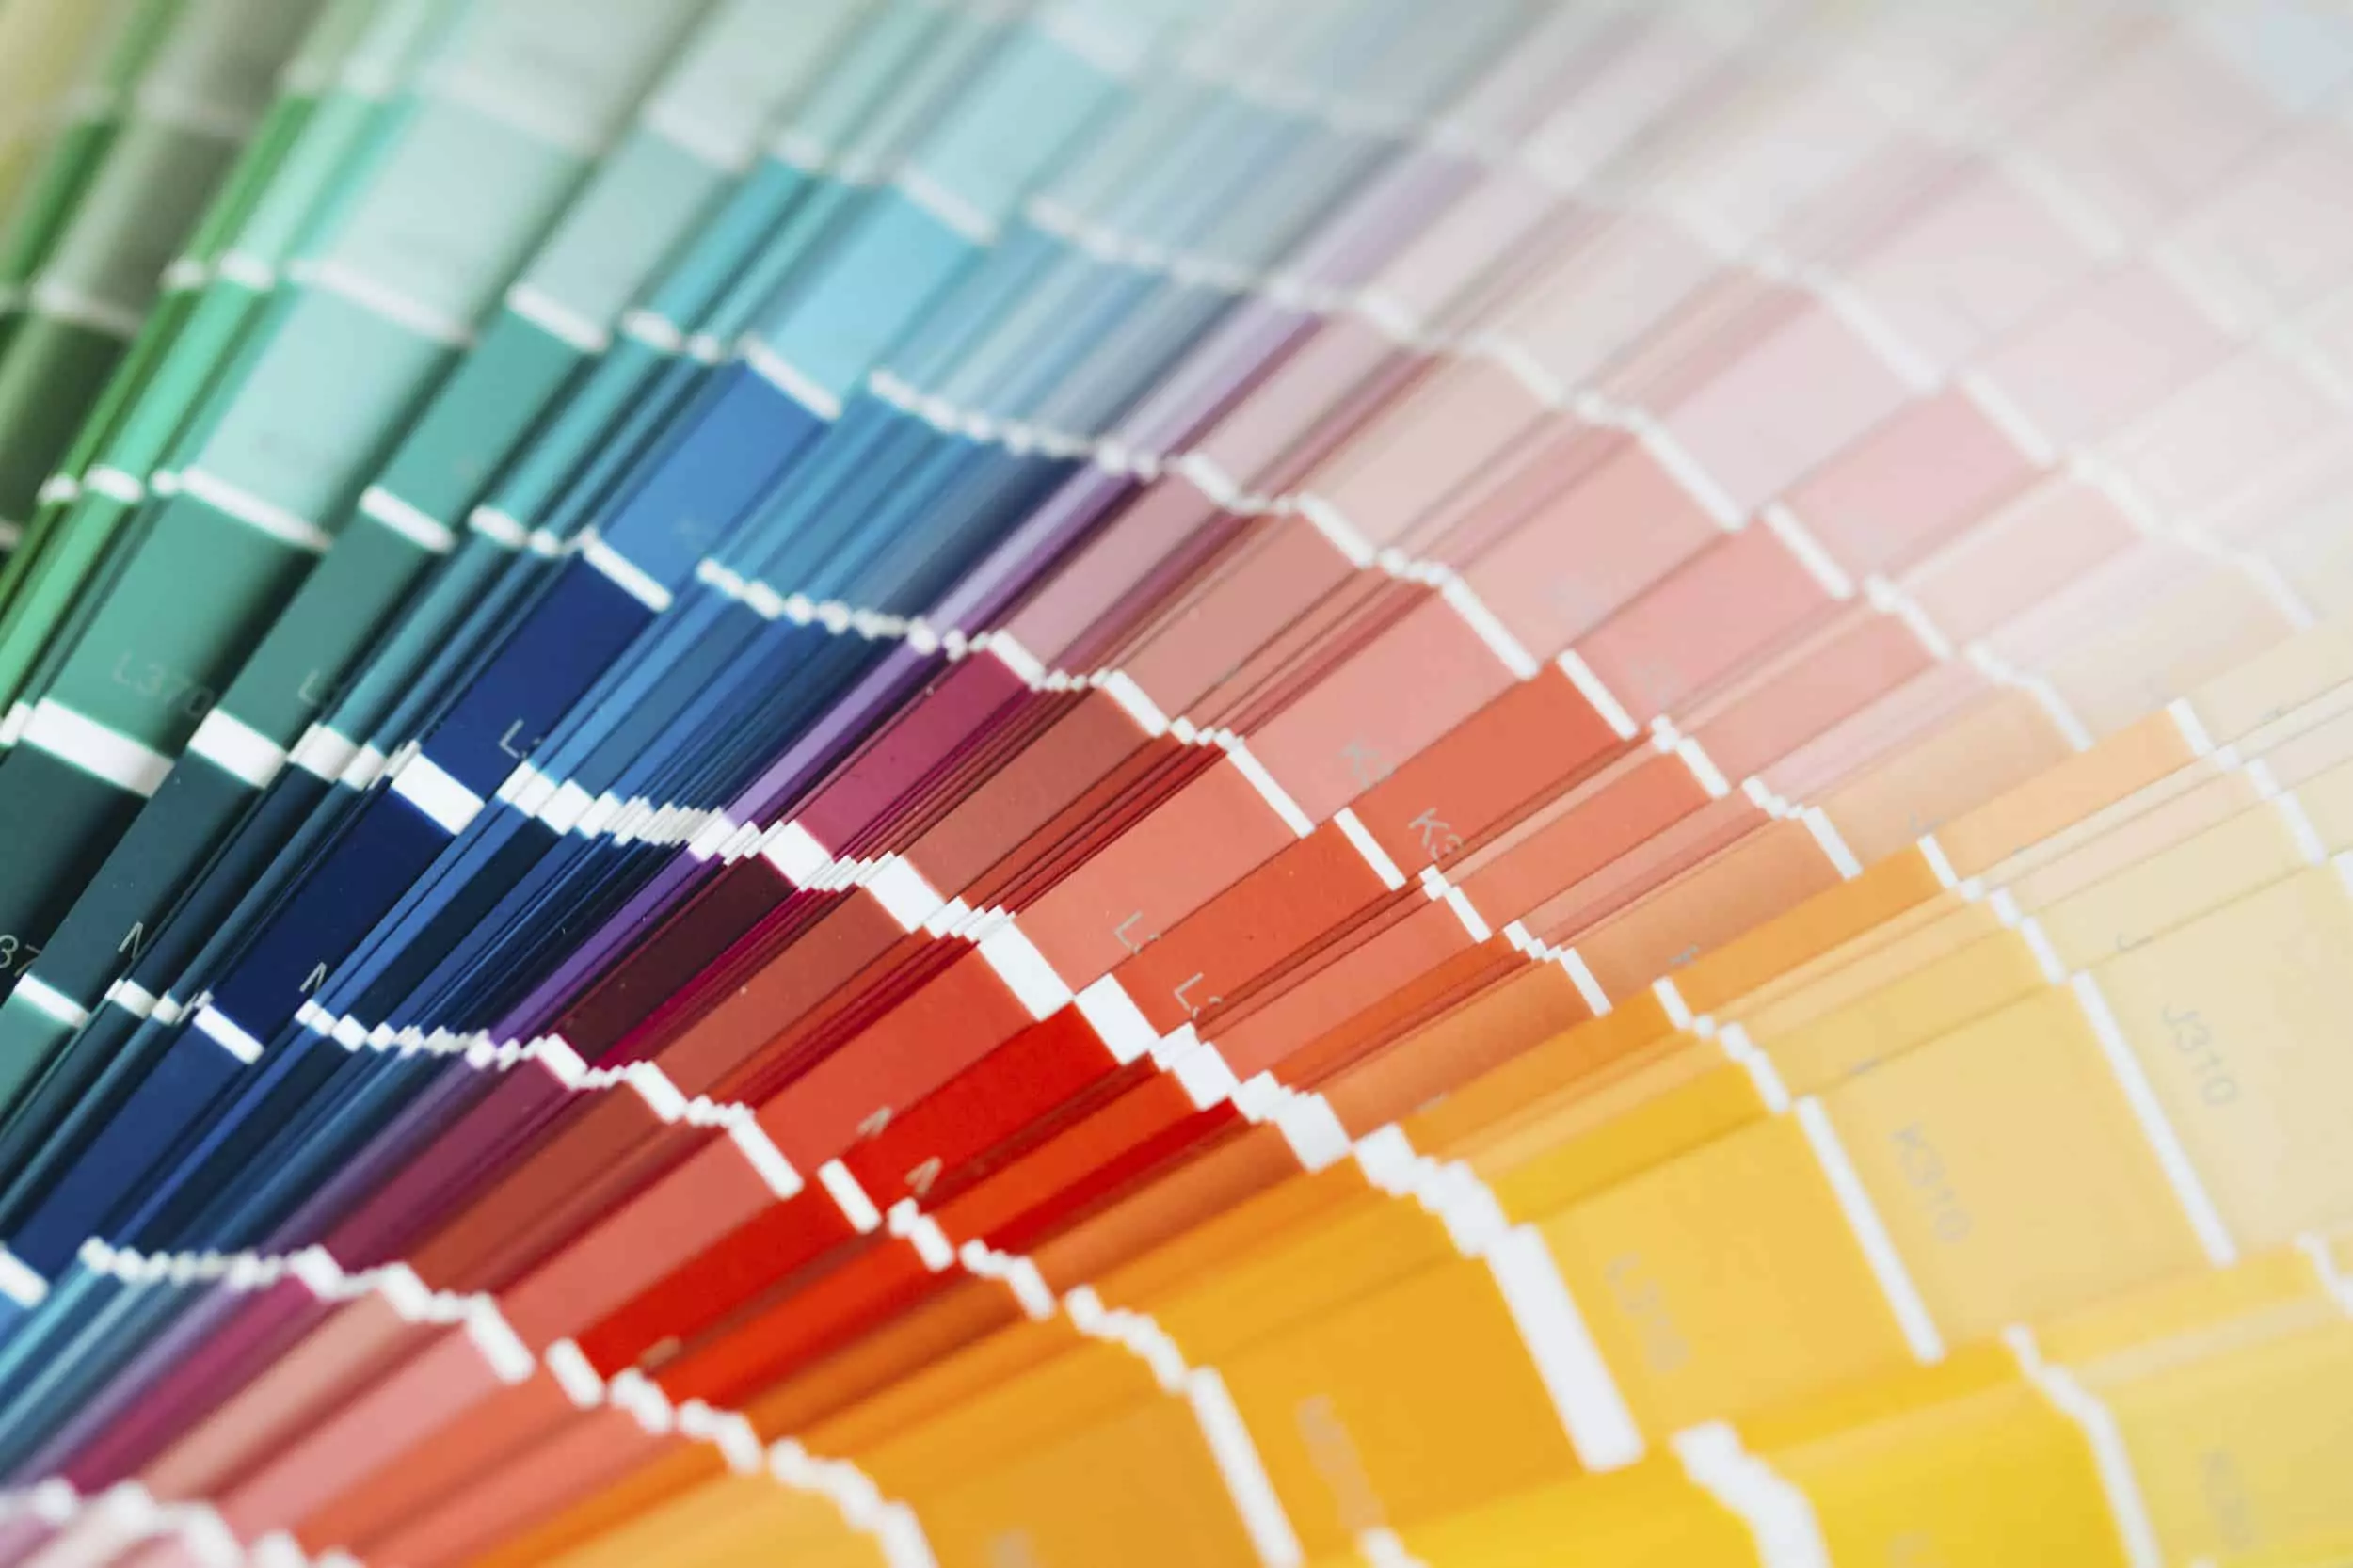 The Psychology Of Color in Graphic Design